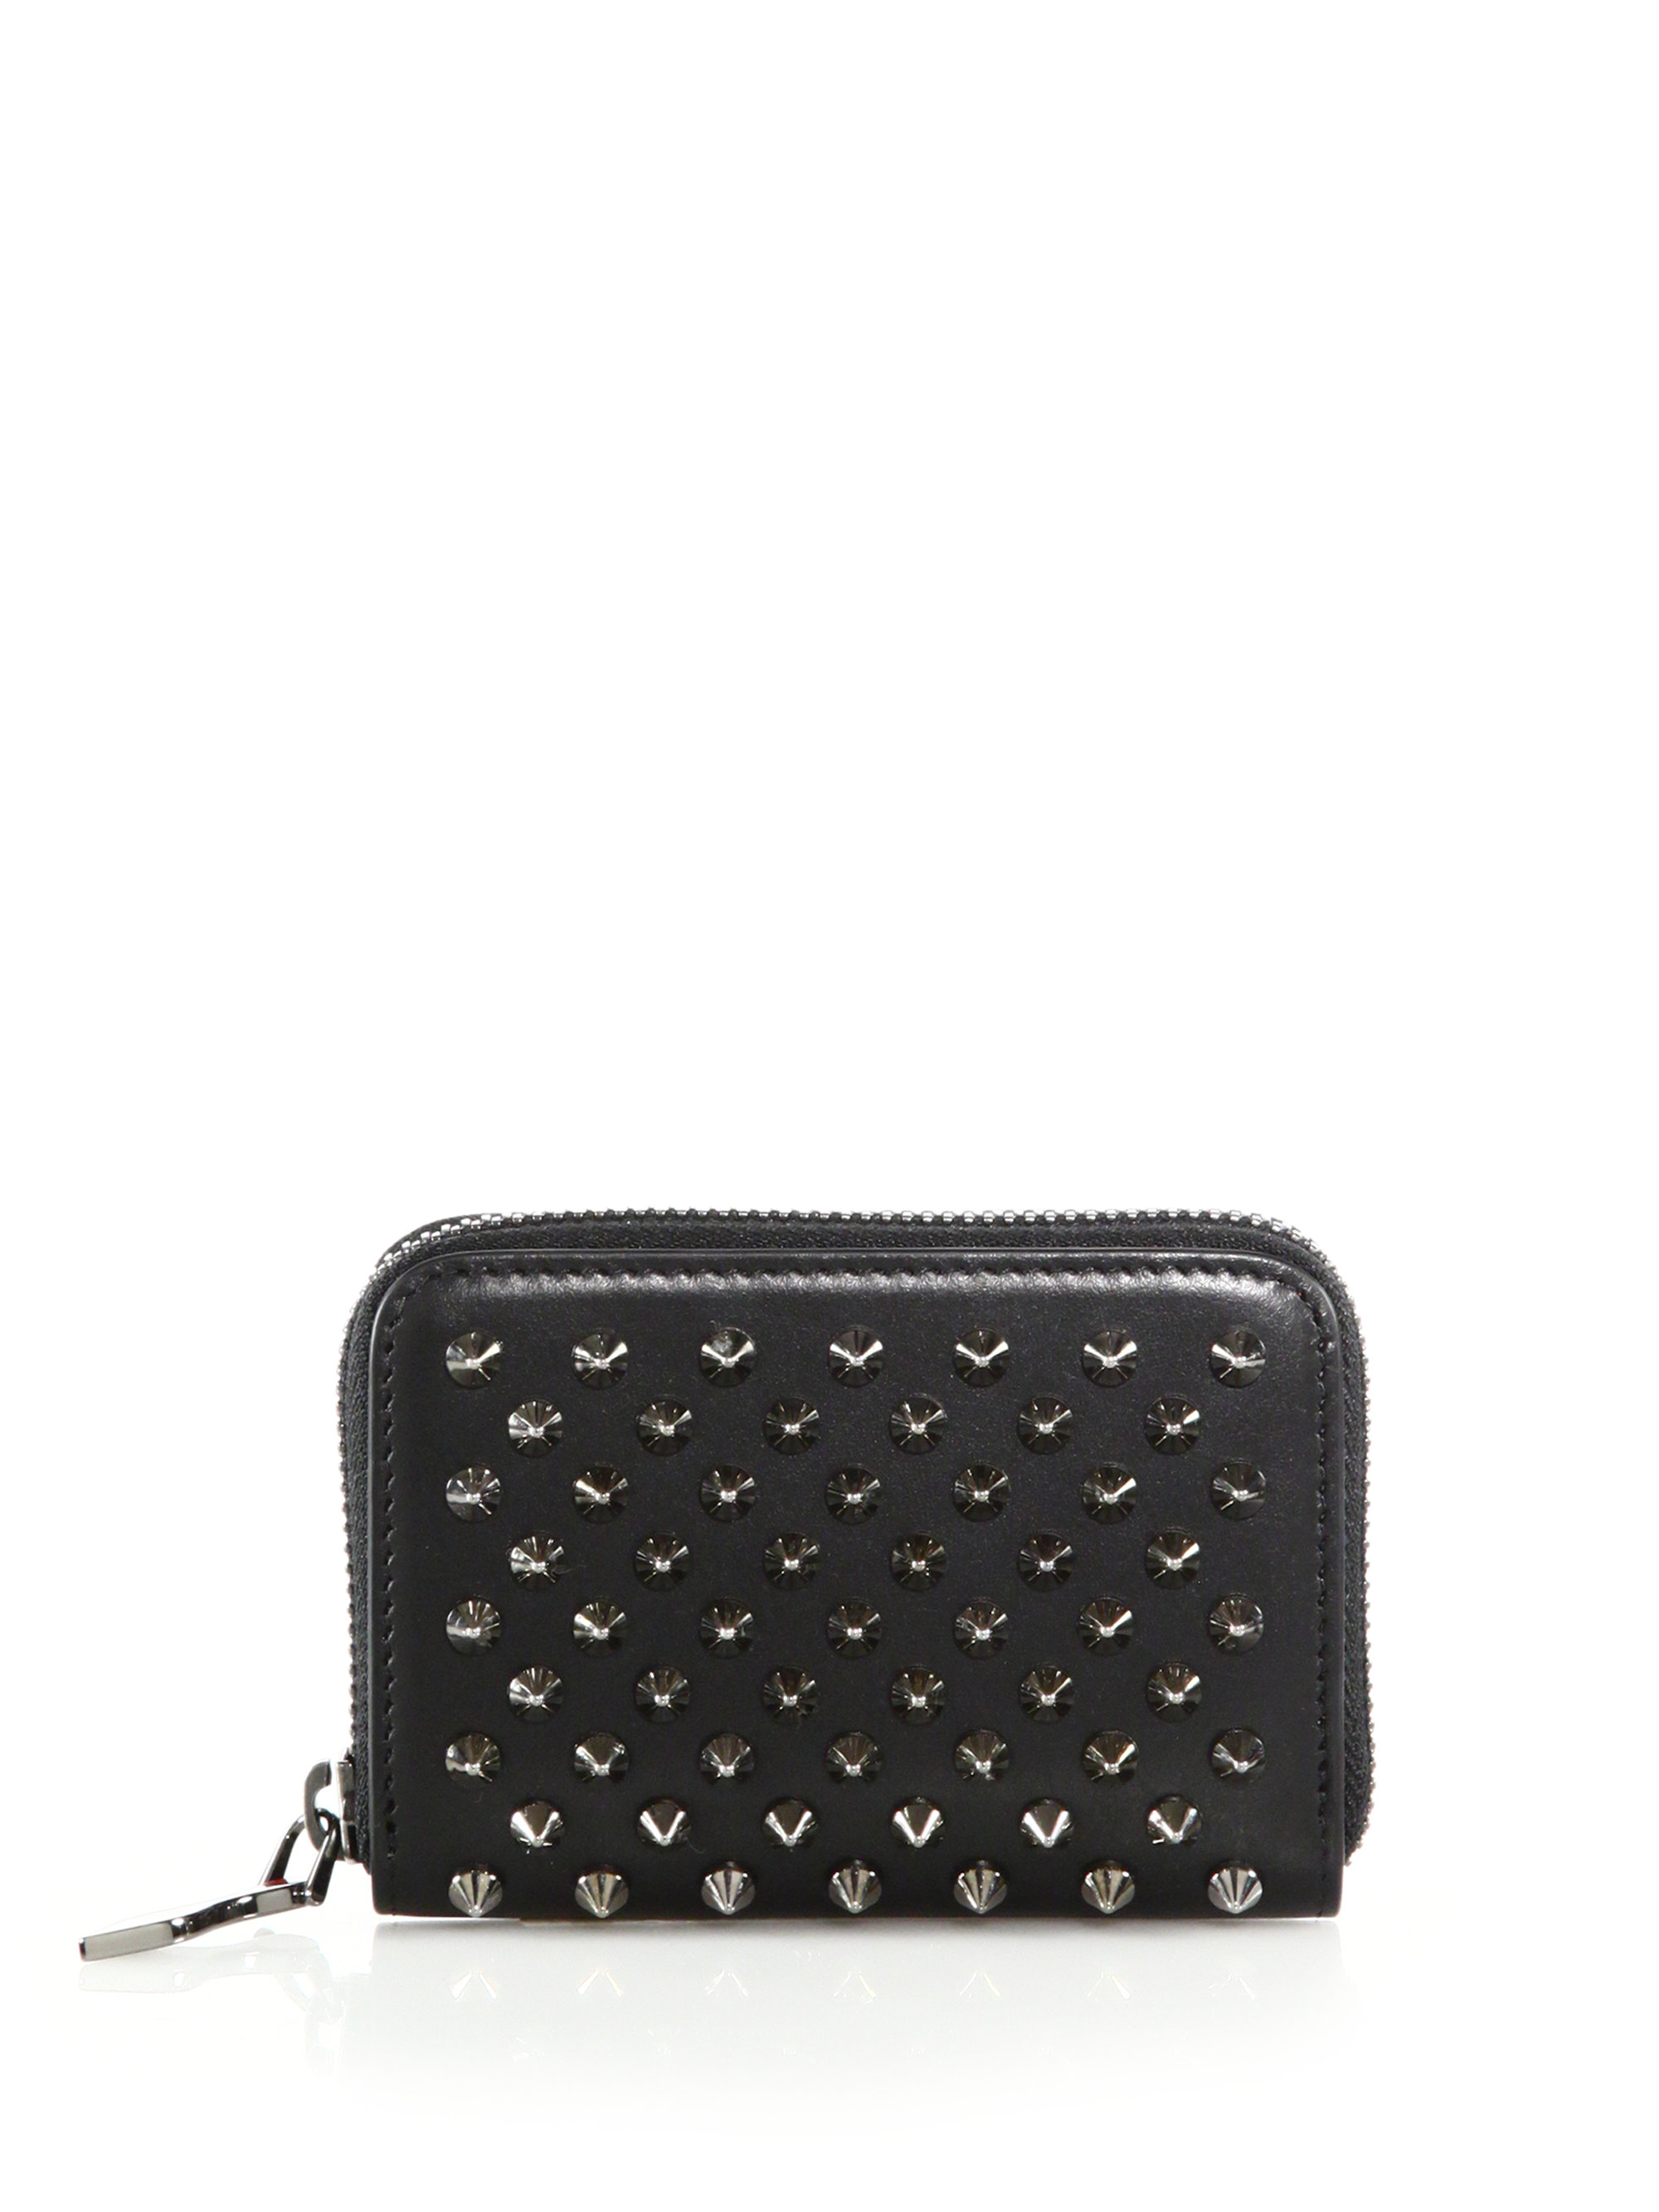 Christian louboutin Panettone Spiked Coin Purse in Black | Lyst